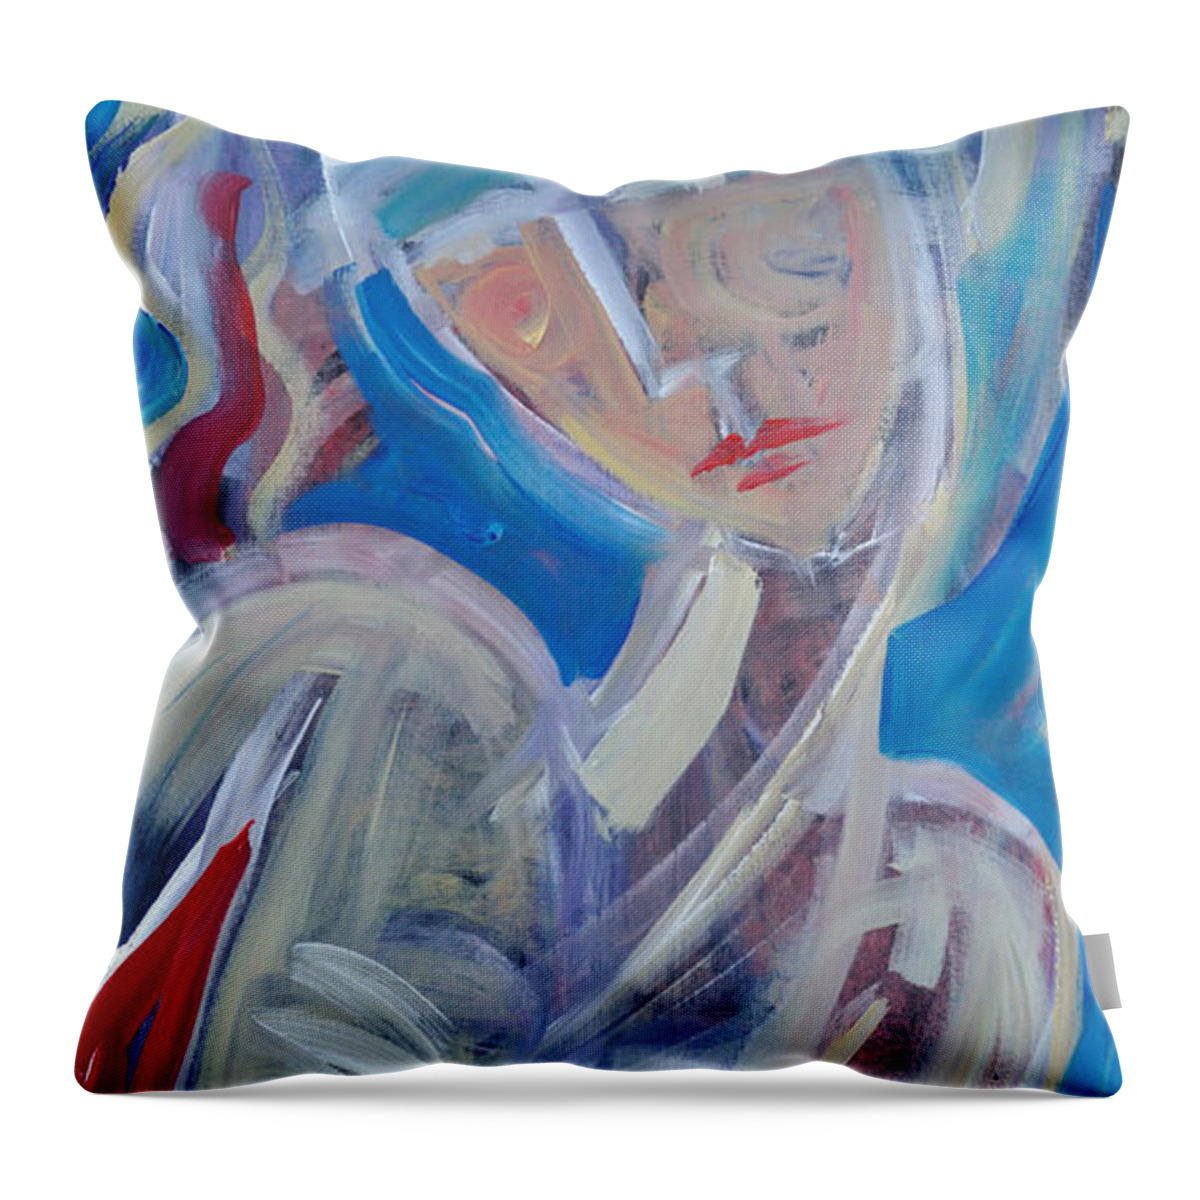 Woman Throw Pillow featuring the painting Embrace Me by Tim Nyberg